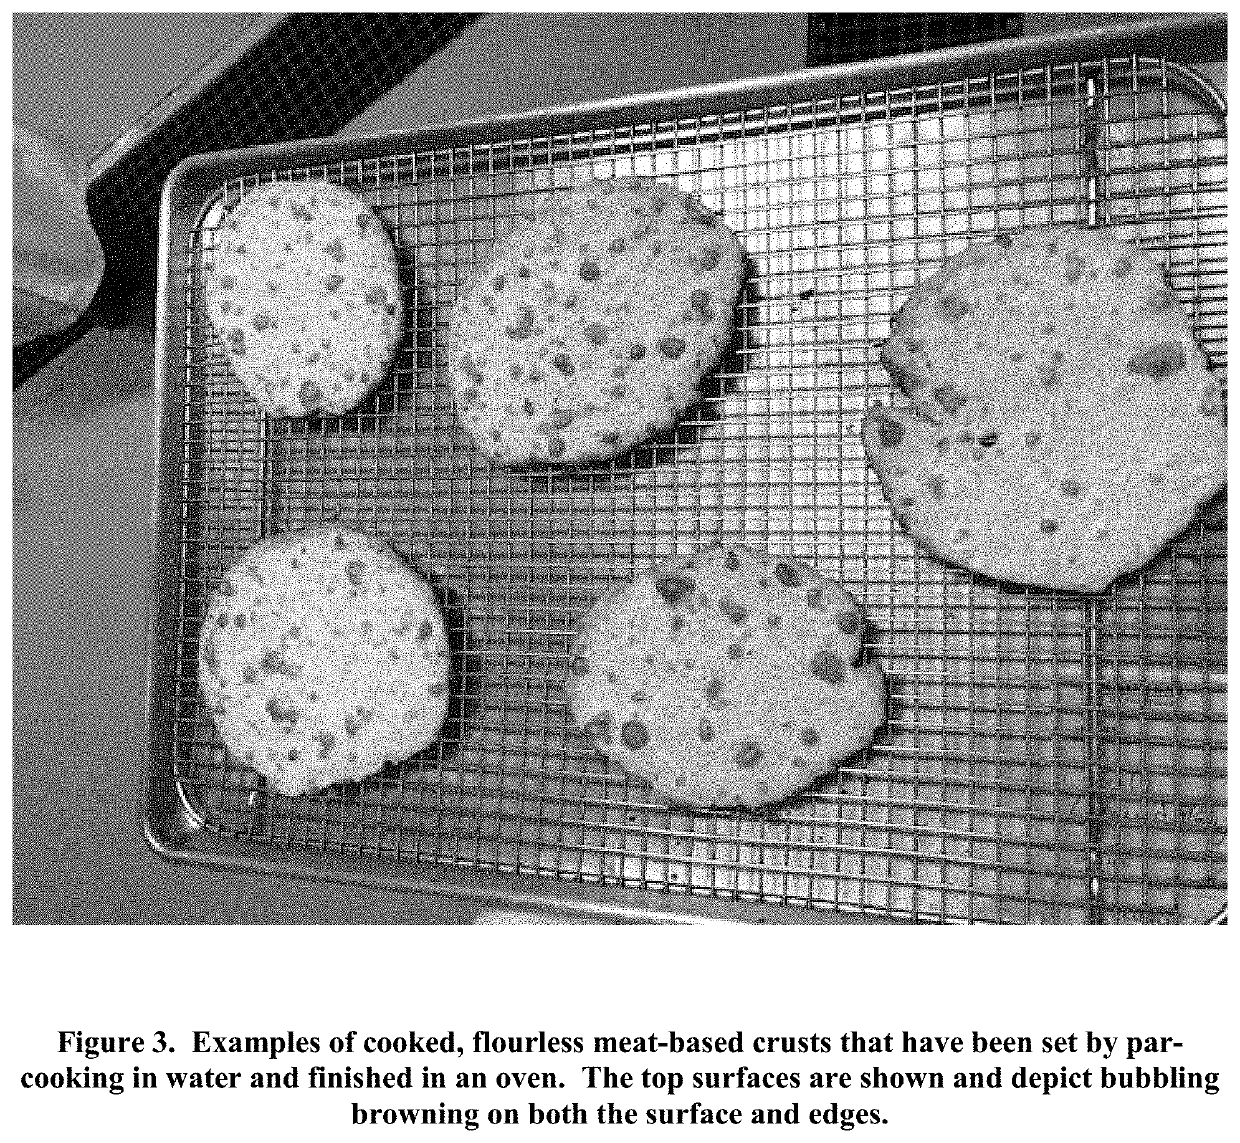 Flourless baked products and methods of preparation